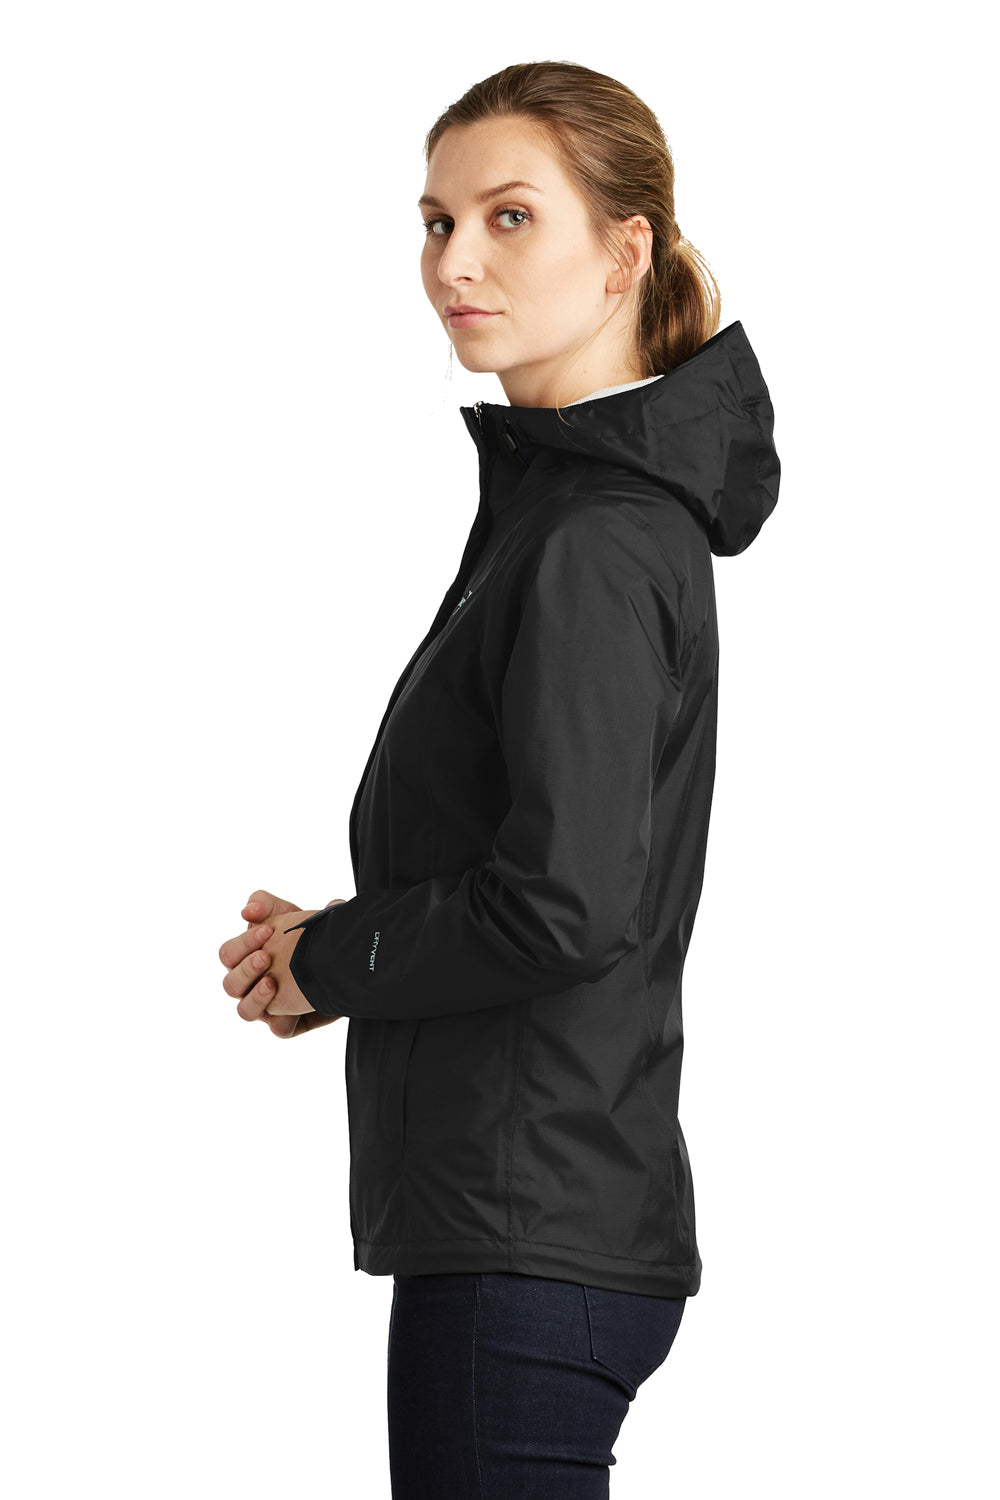 The North Face NF0A3LH5 Womens DryVent Waterproof Full Zip Hooded Jacket Black Side